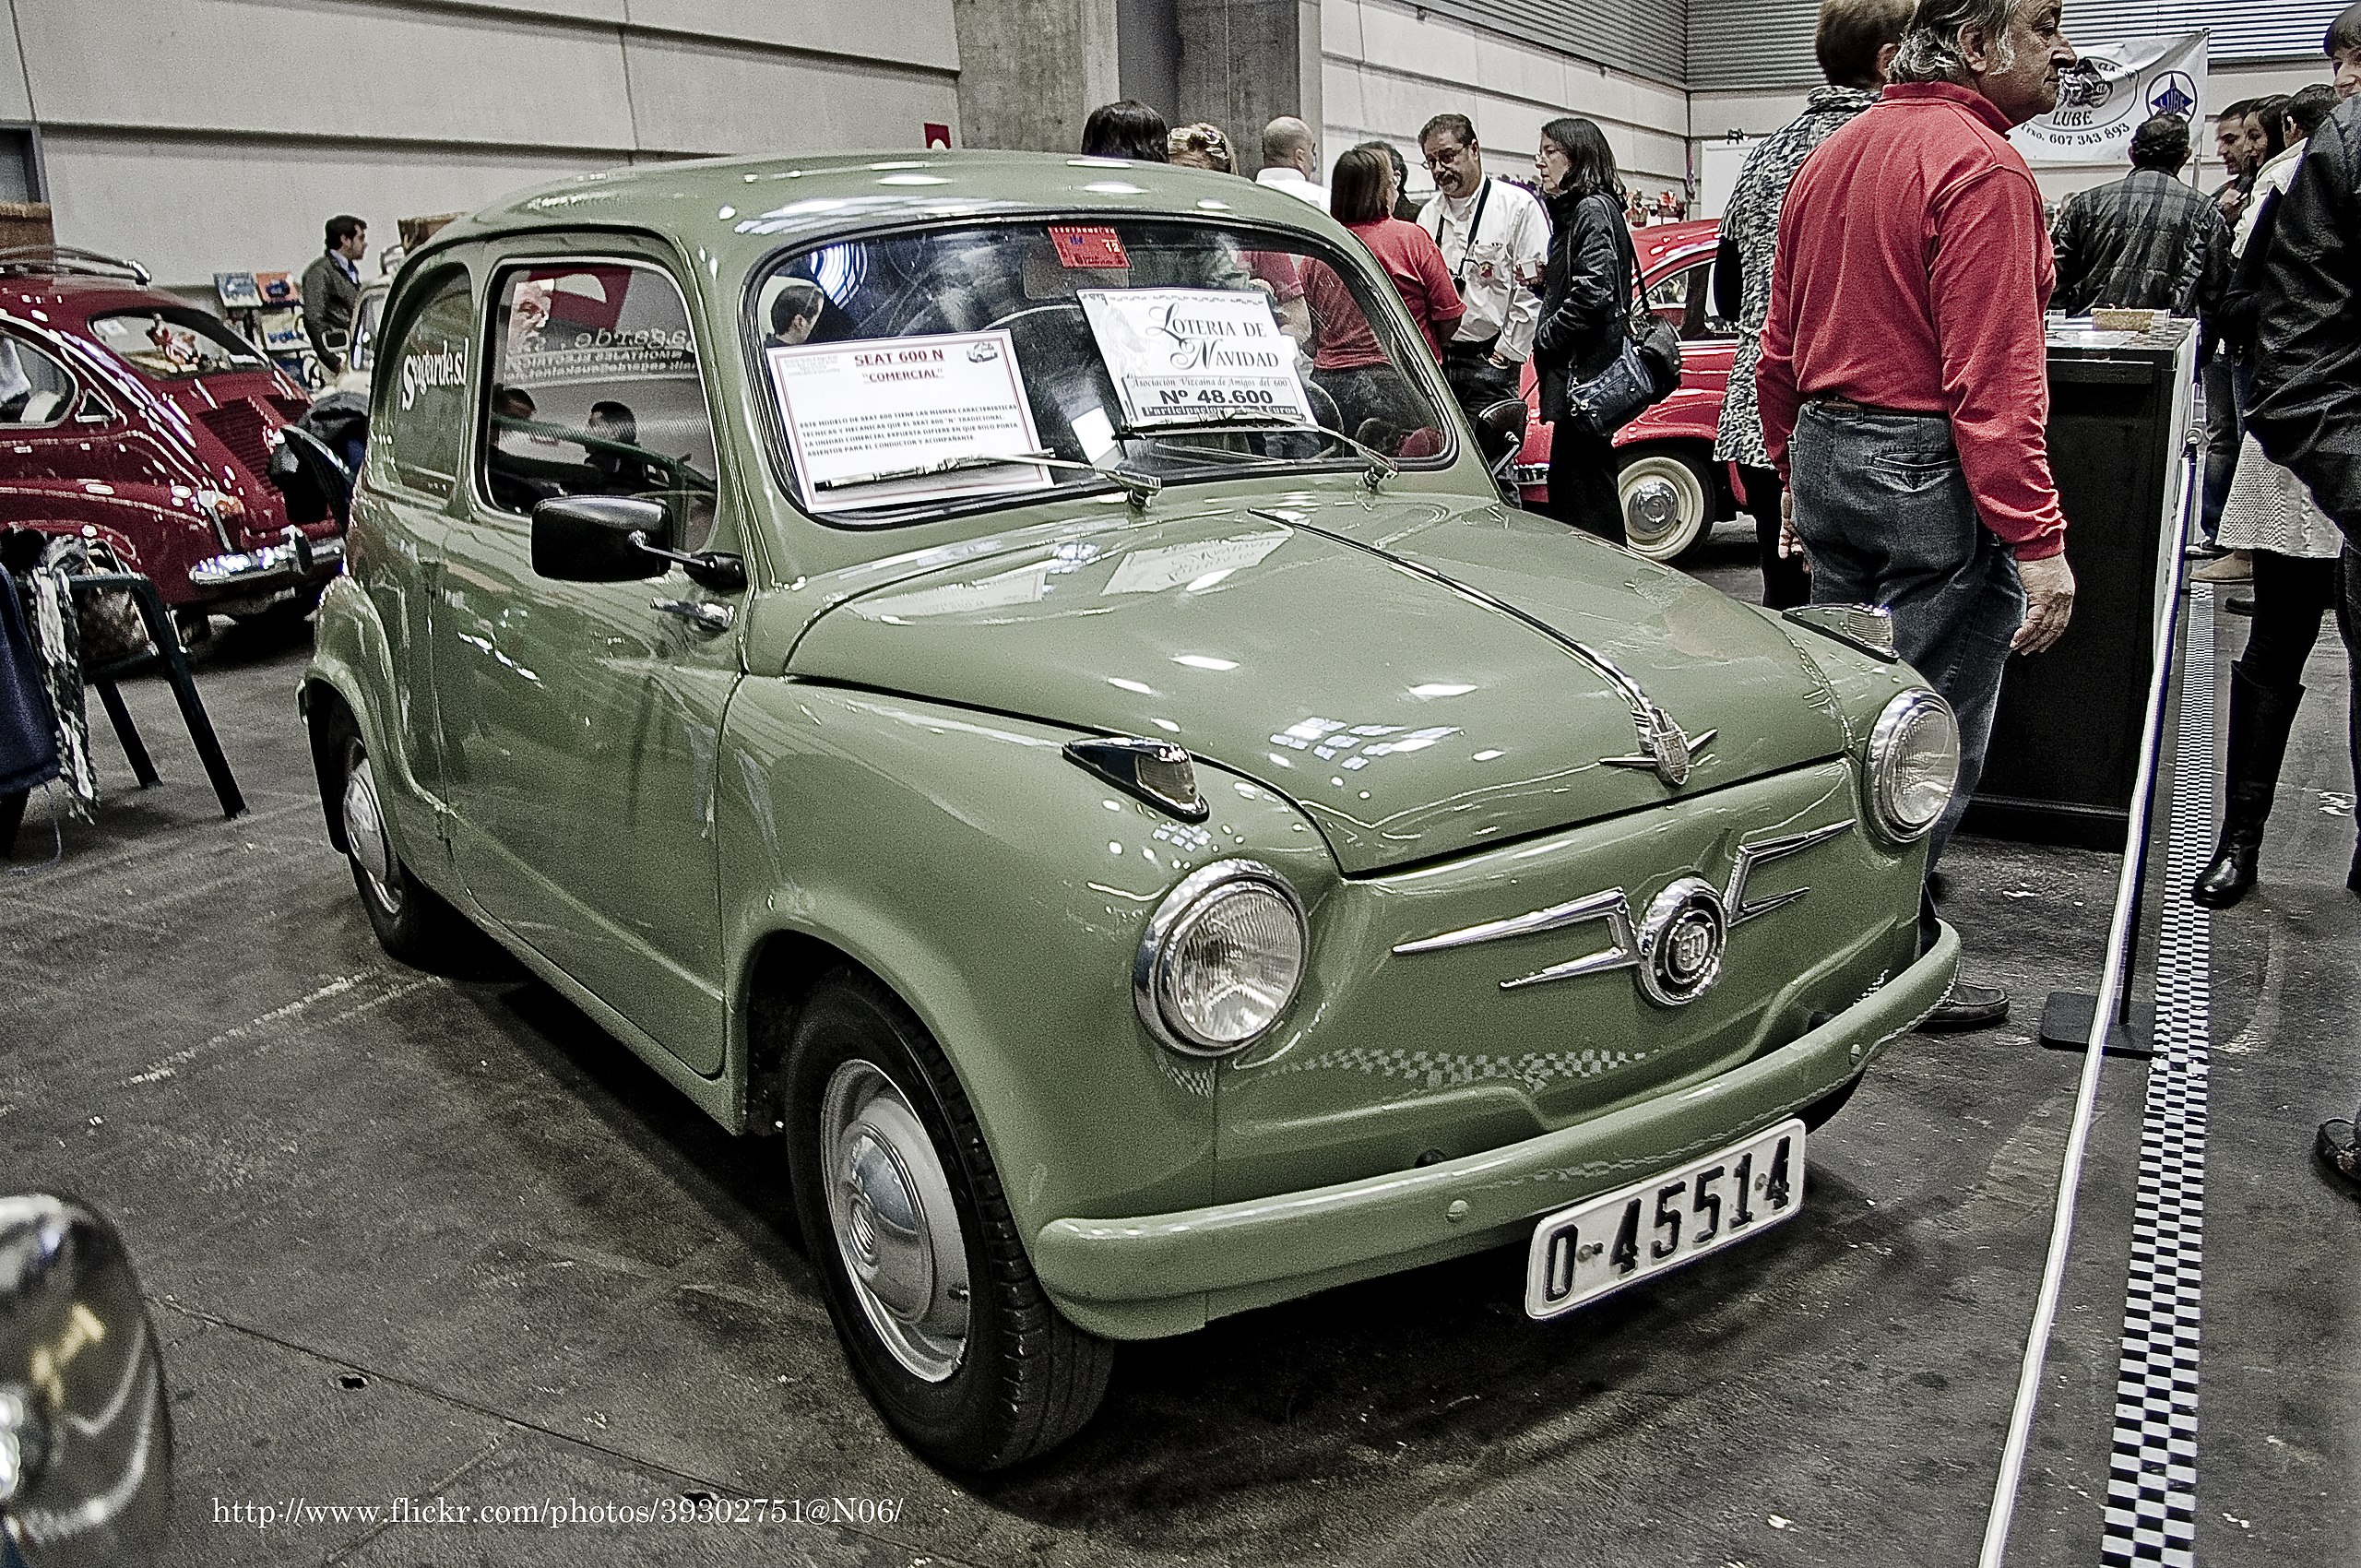 Seat 600, The Independent